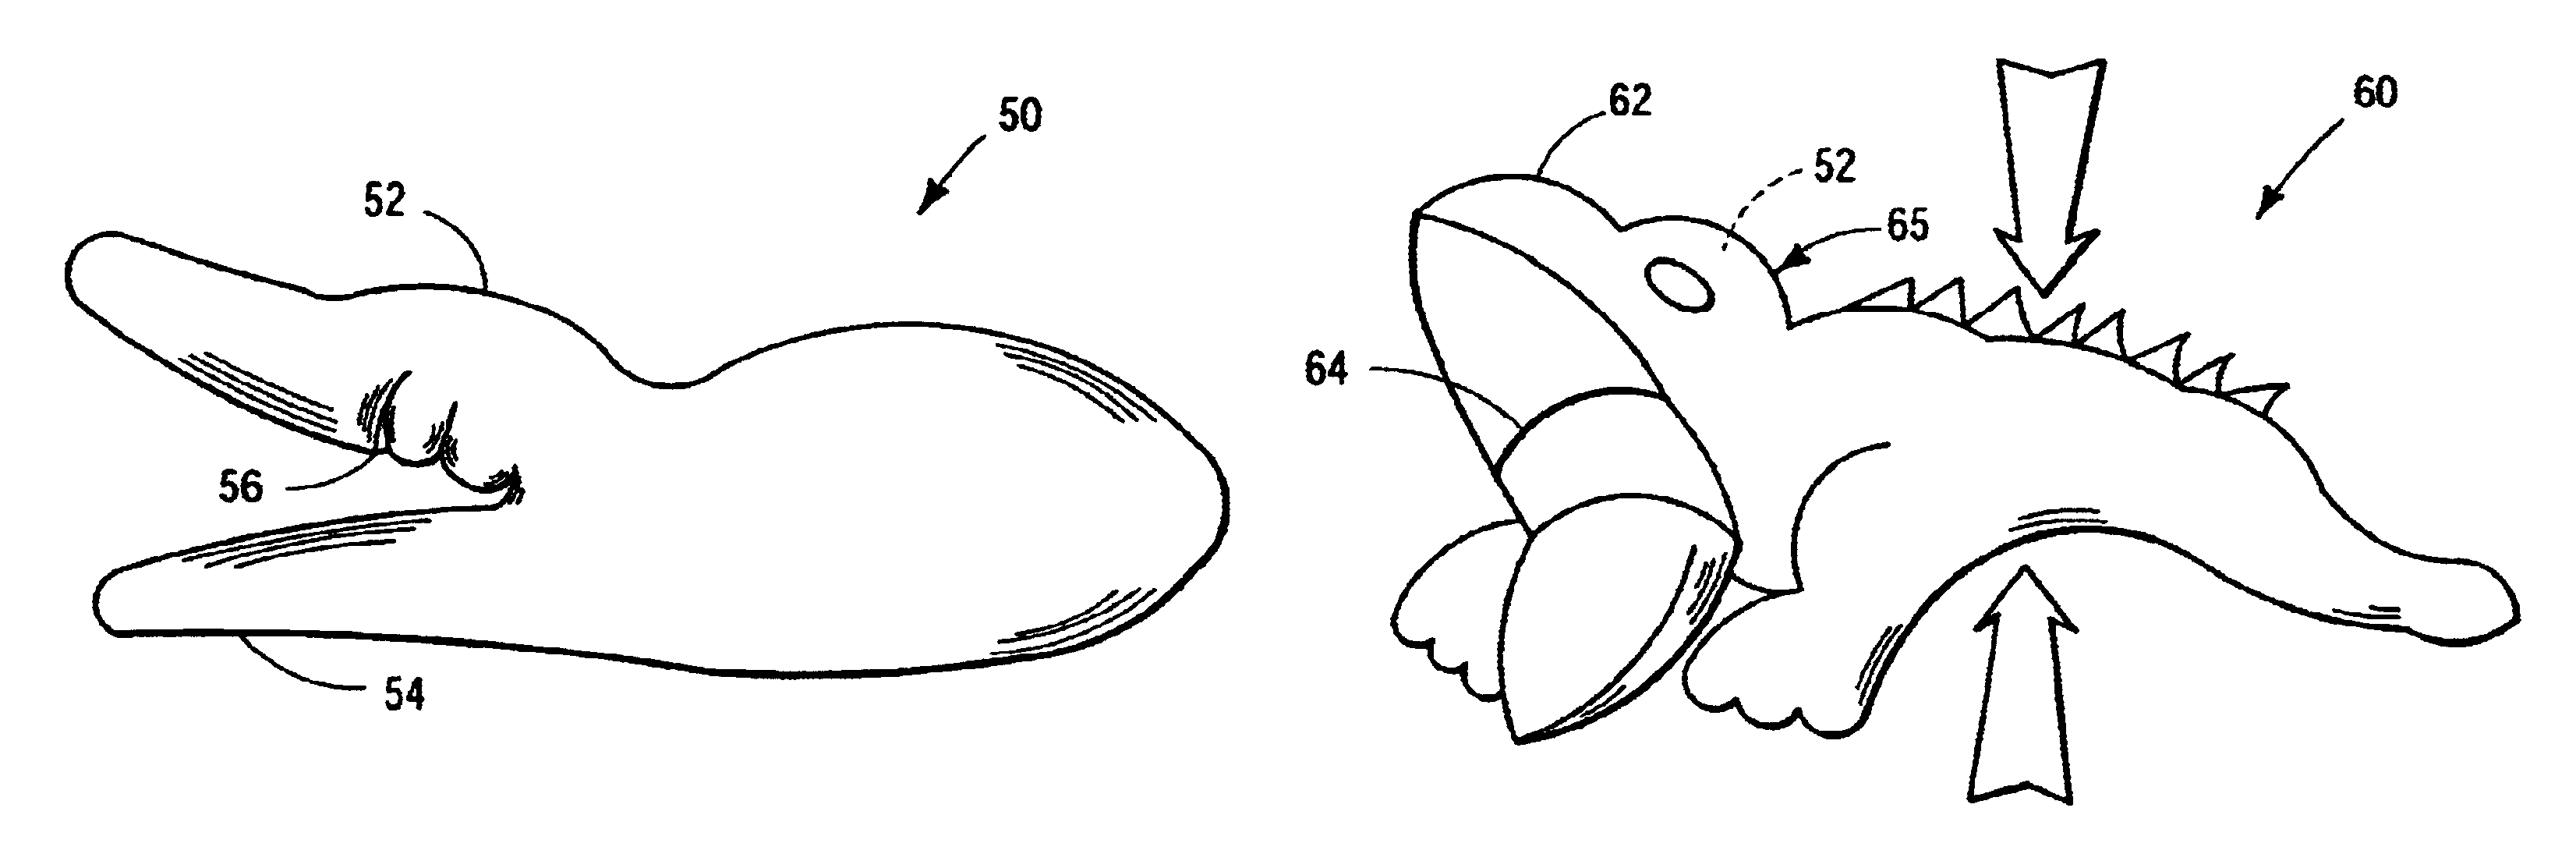 Actuatable toy containing deformable bladder